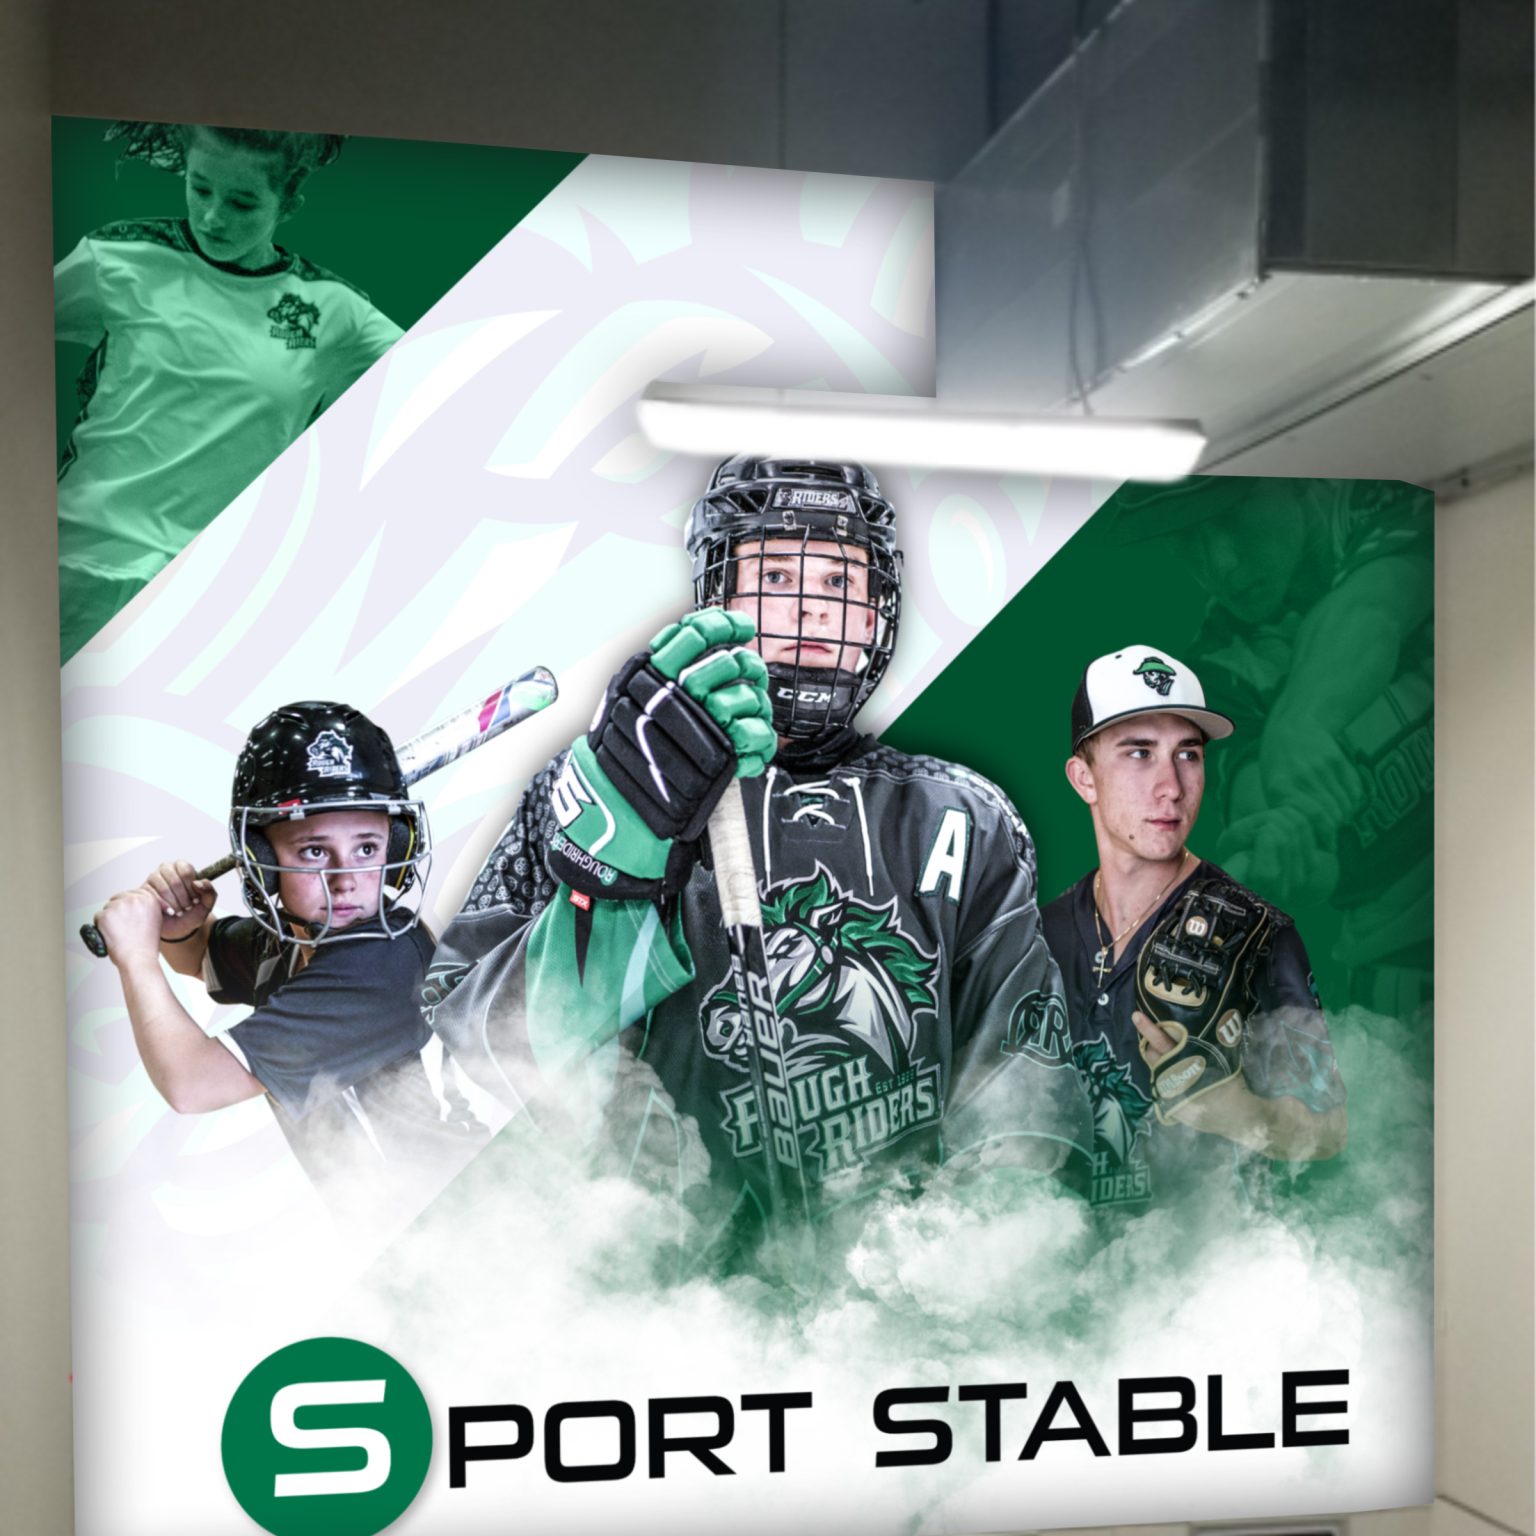 Wall graphic for Sport Stable